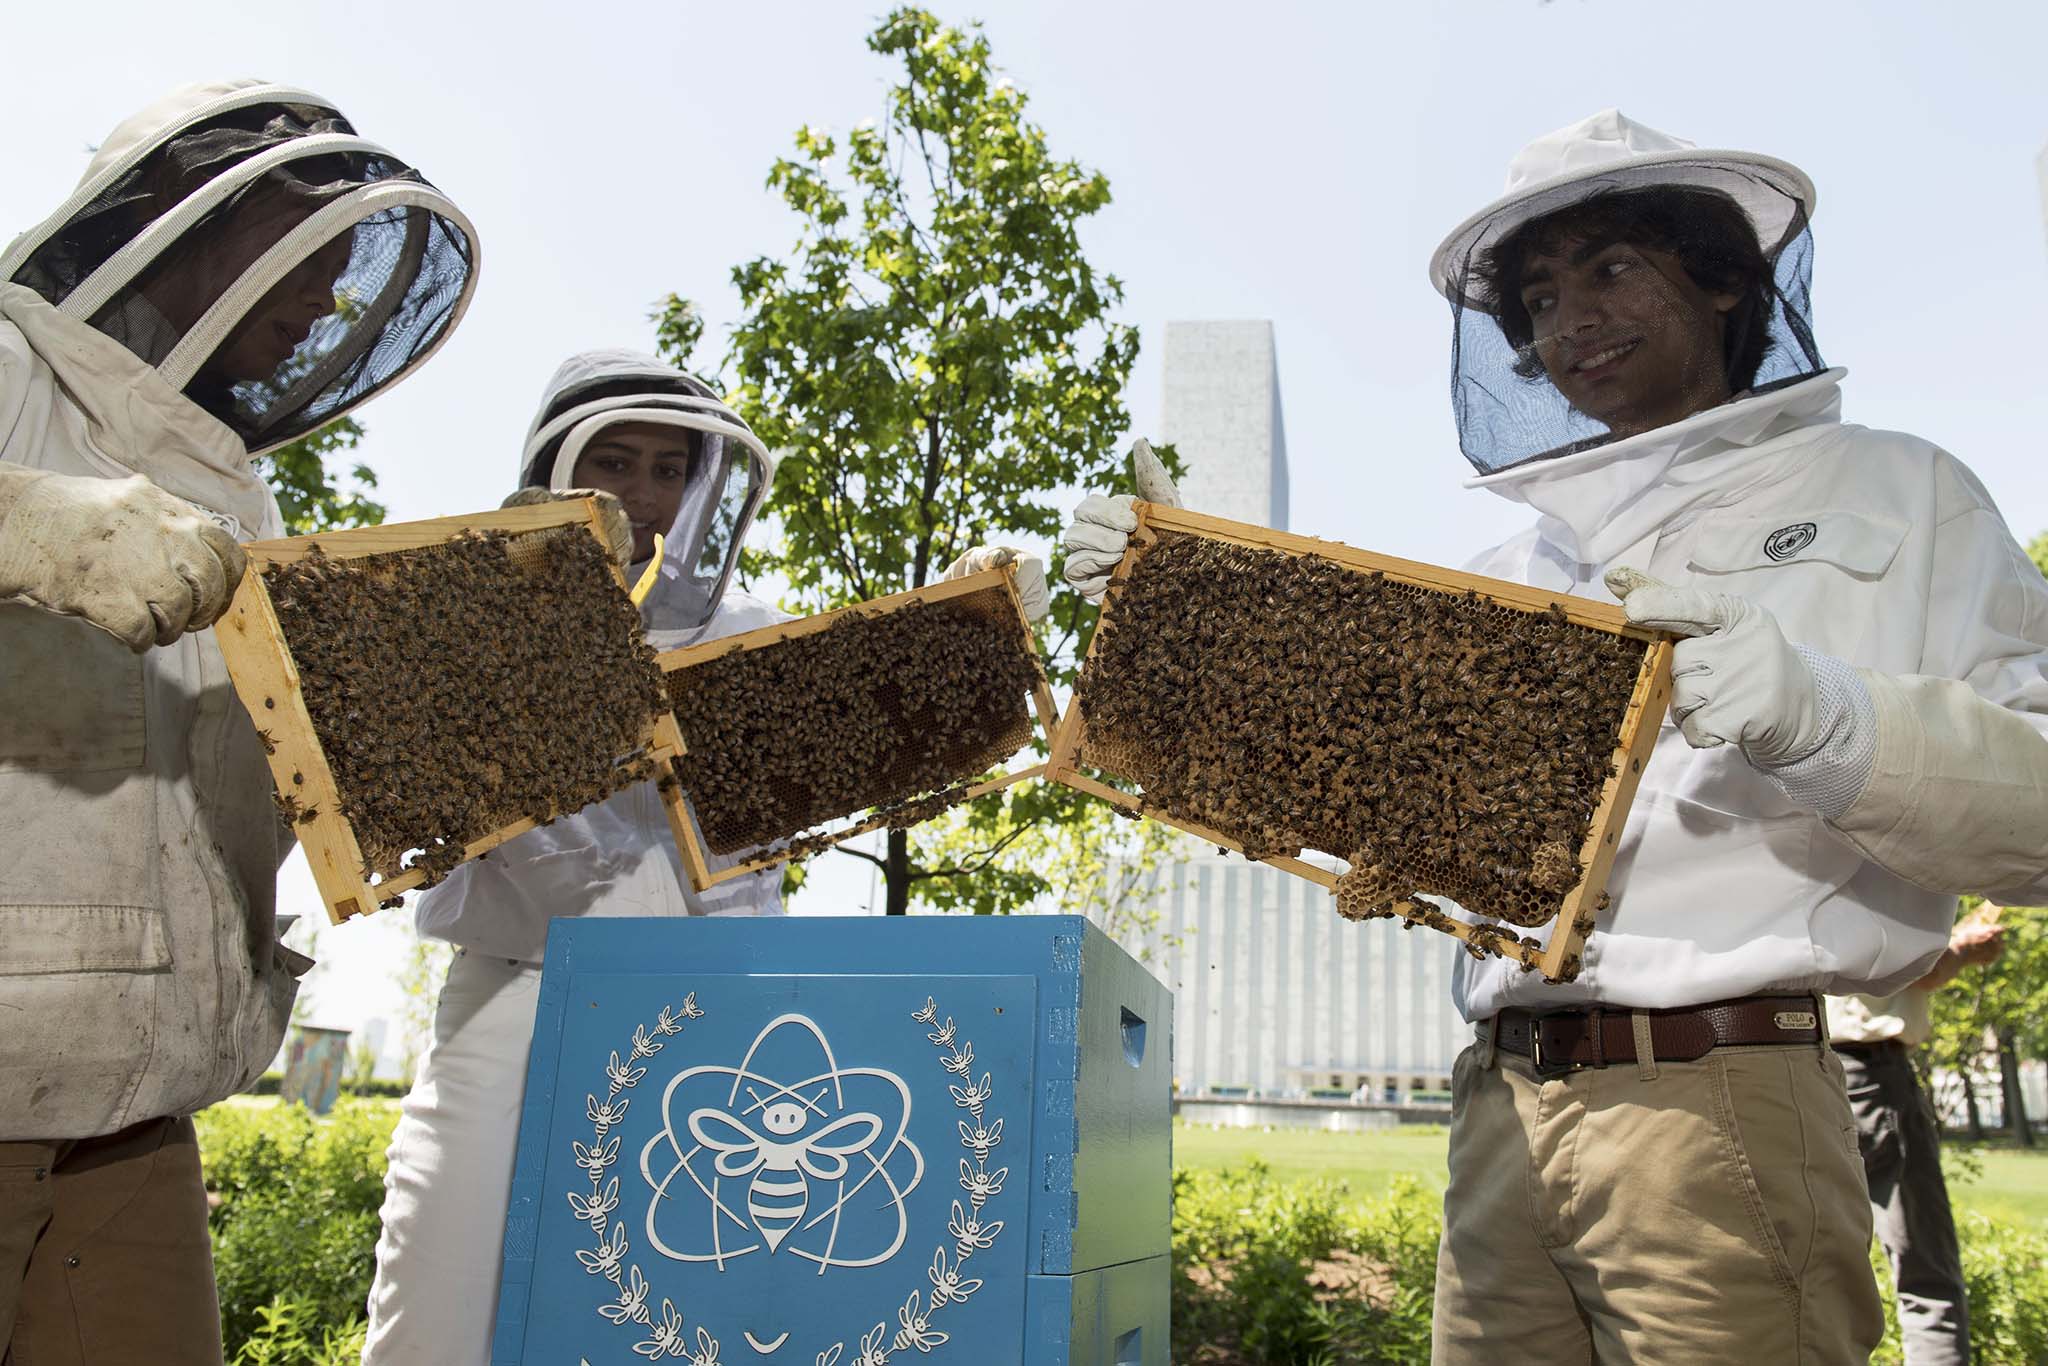 Three people in beekeeping gear holding trays of honeycomb and honeybees